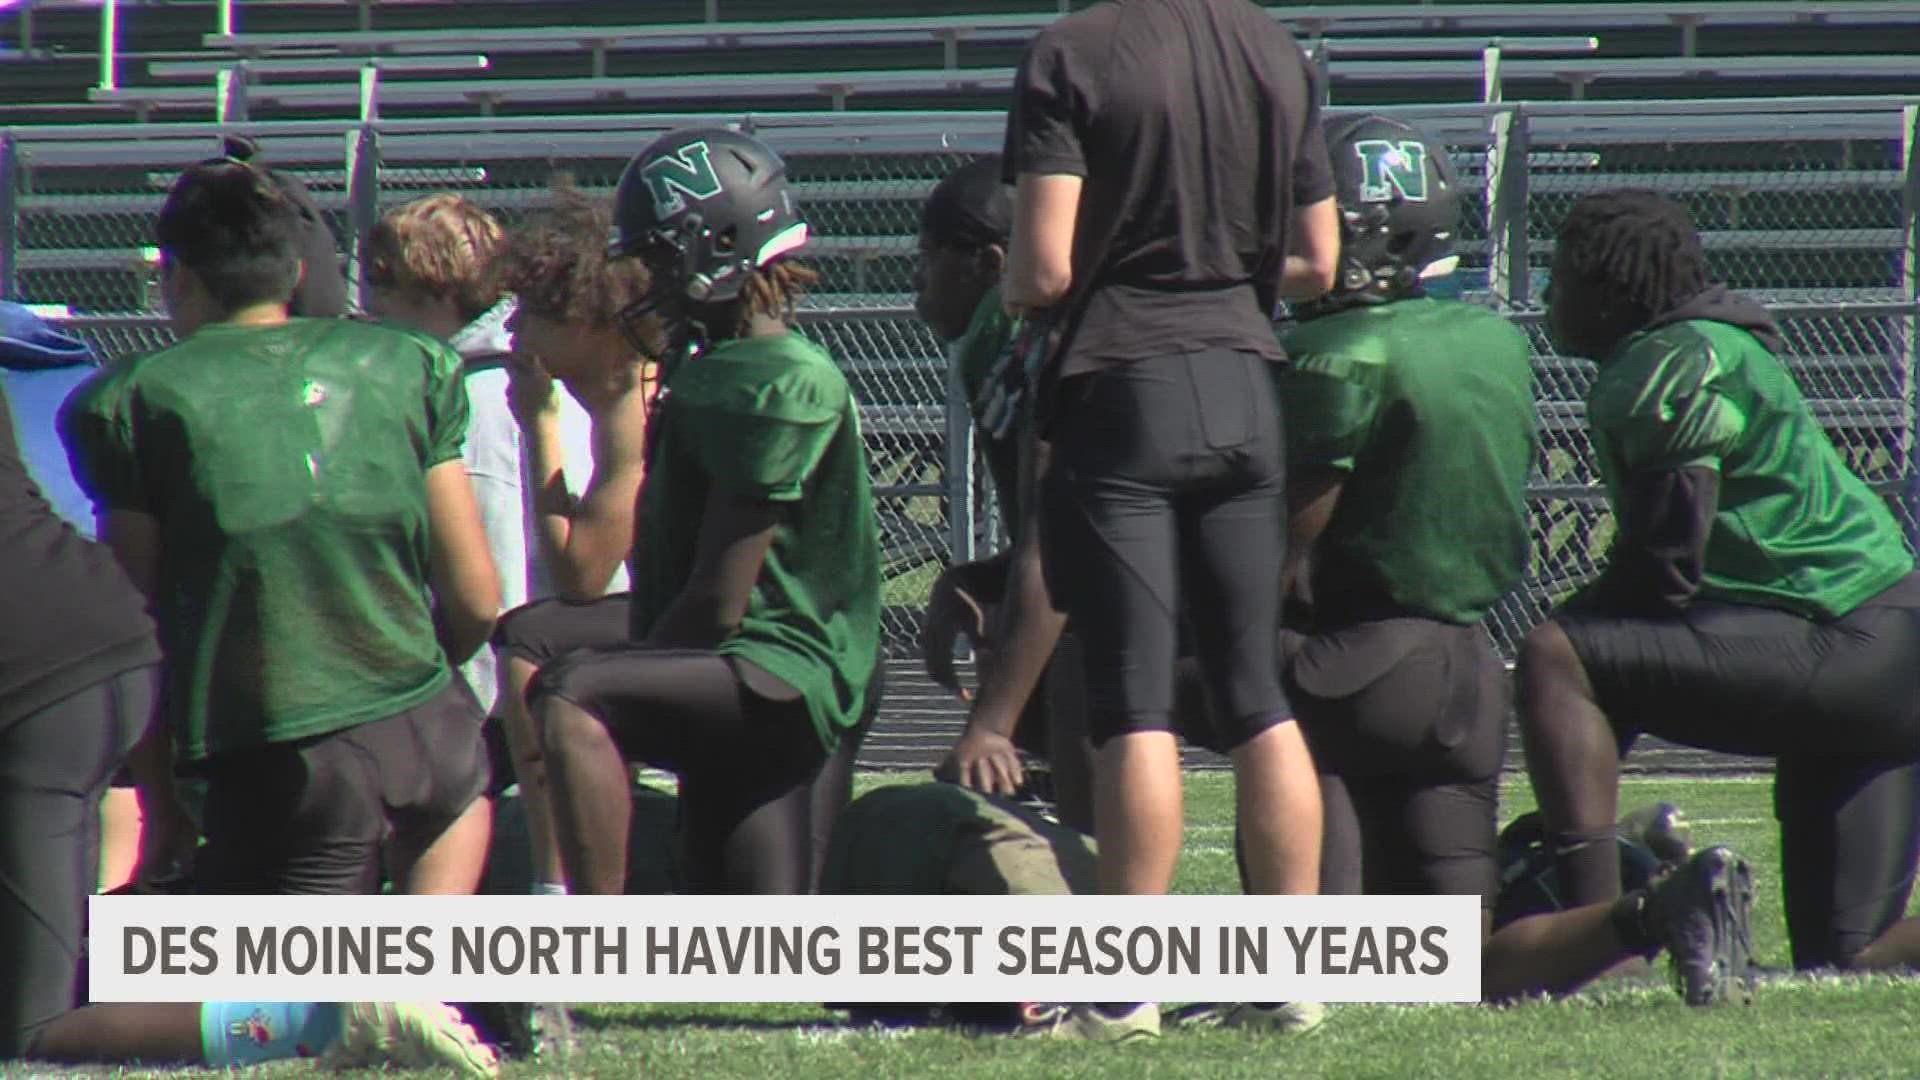 1996 was the last time Des Moines North won four games in a season. That all changed last week with their win over Lincoln.